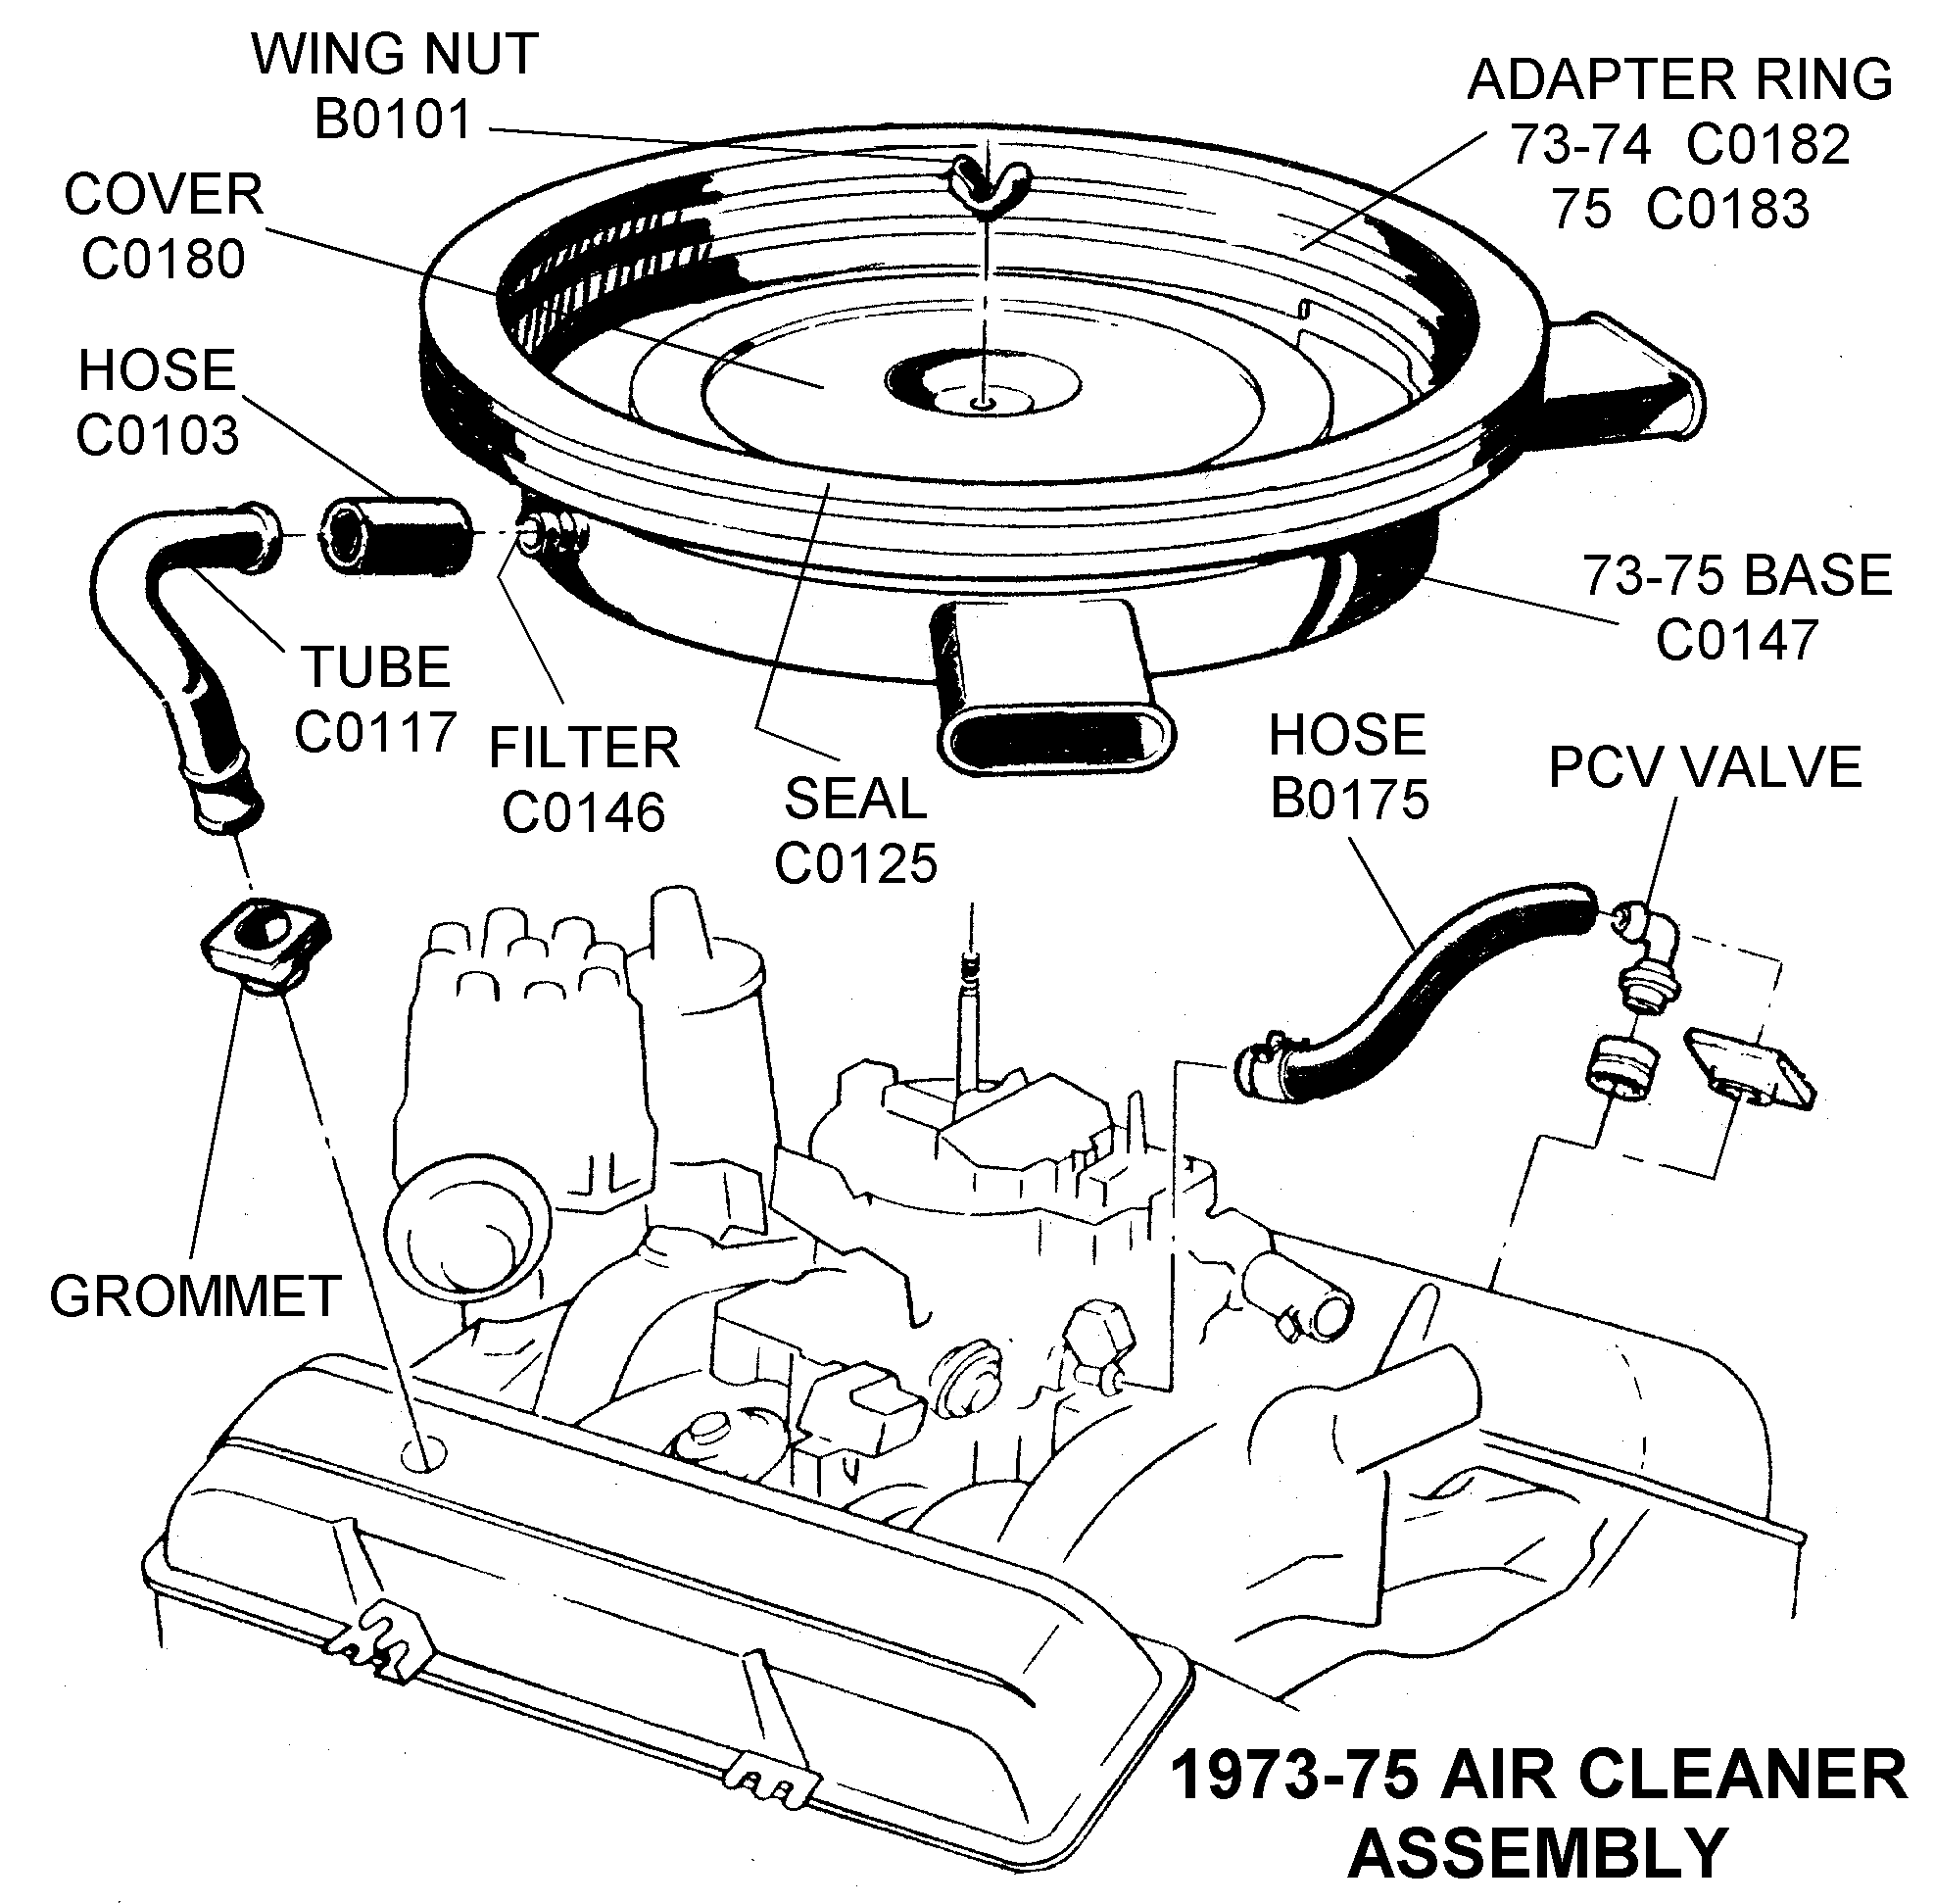 1973-75 Air Cleaner Assembly - Diagram View - Chicago Corvette Supply